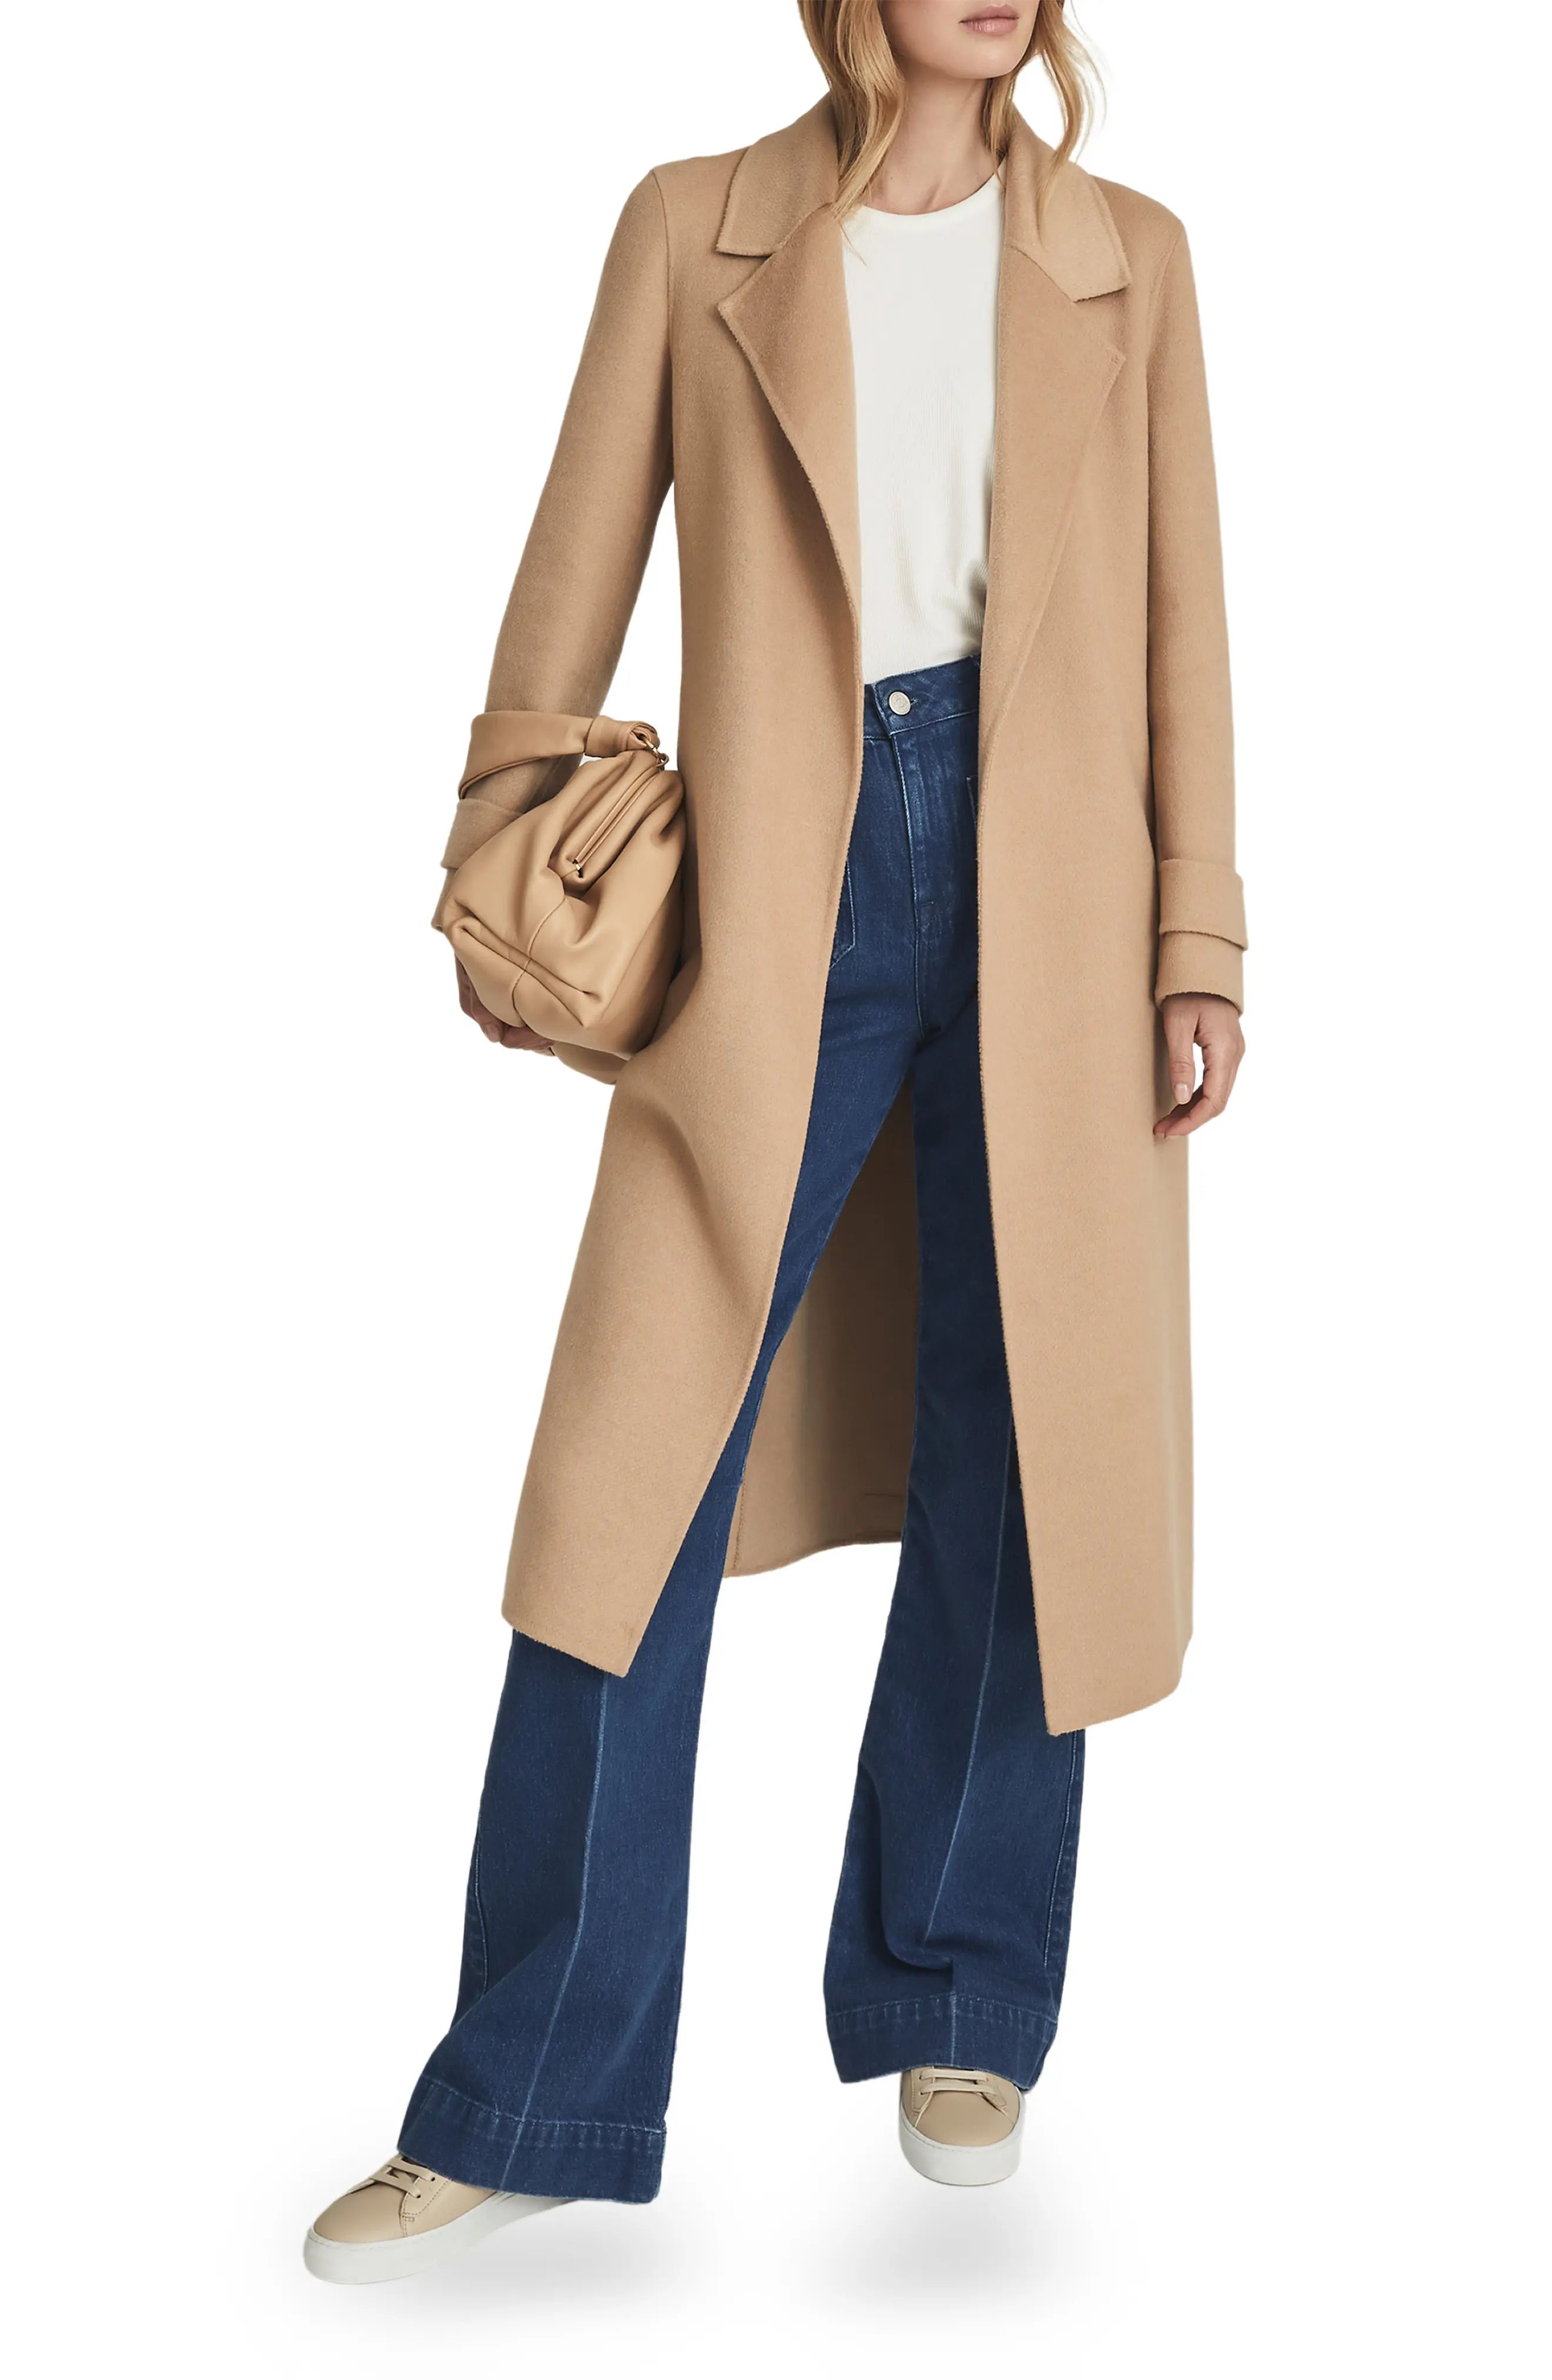 Reiss Leah Wool Blend Wrap Coat, Size 14 Us in Camel at Nordstrom | Nordstrom